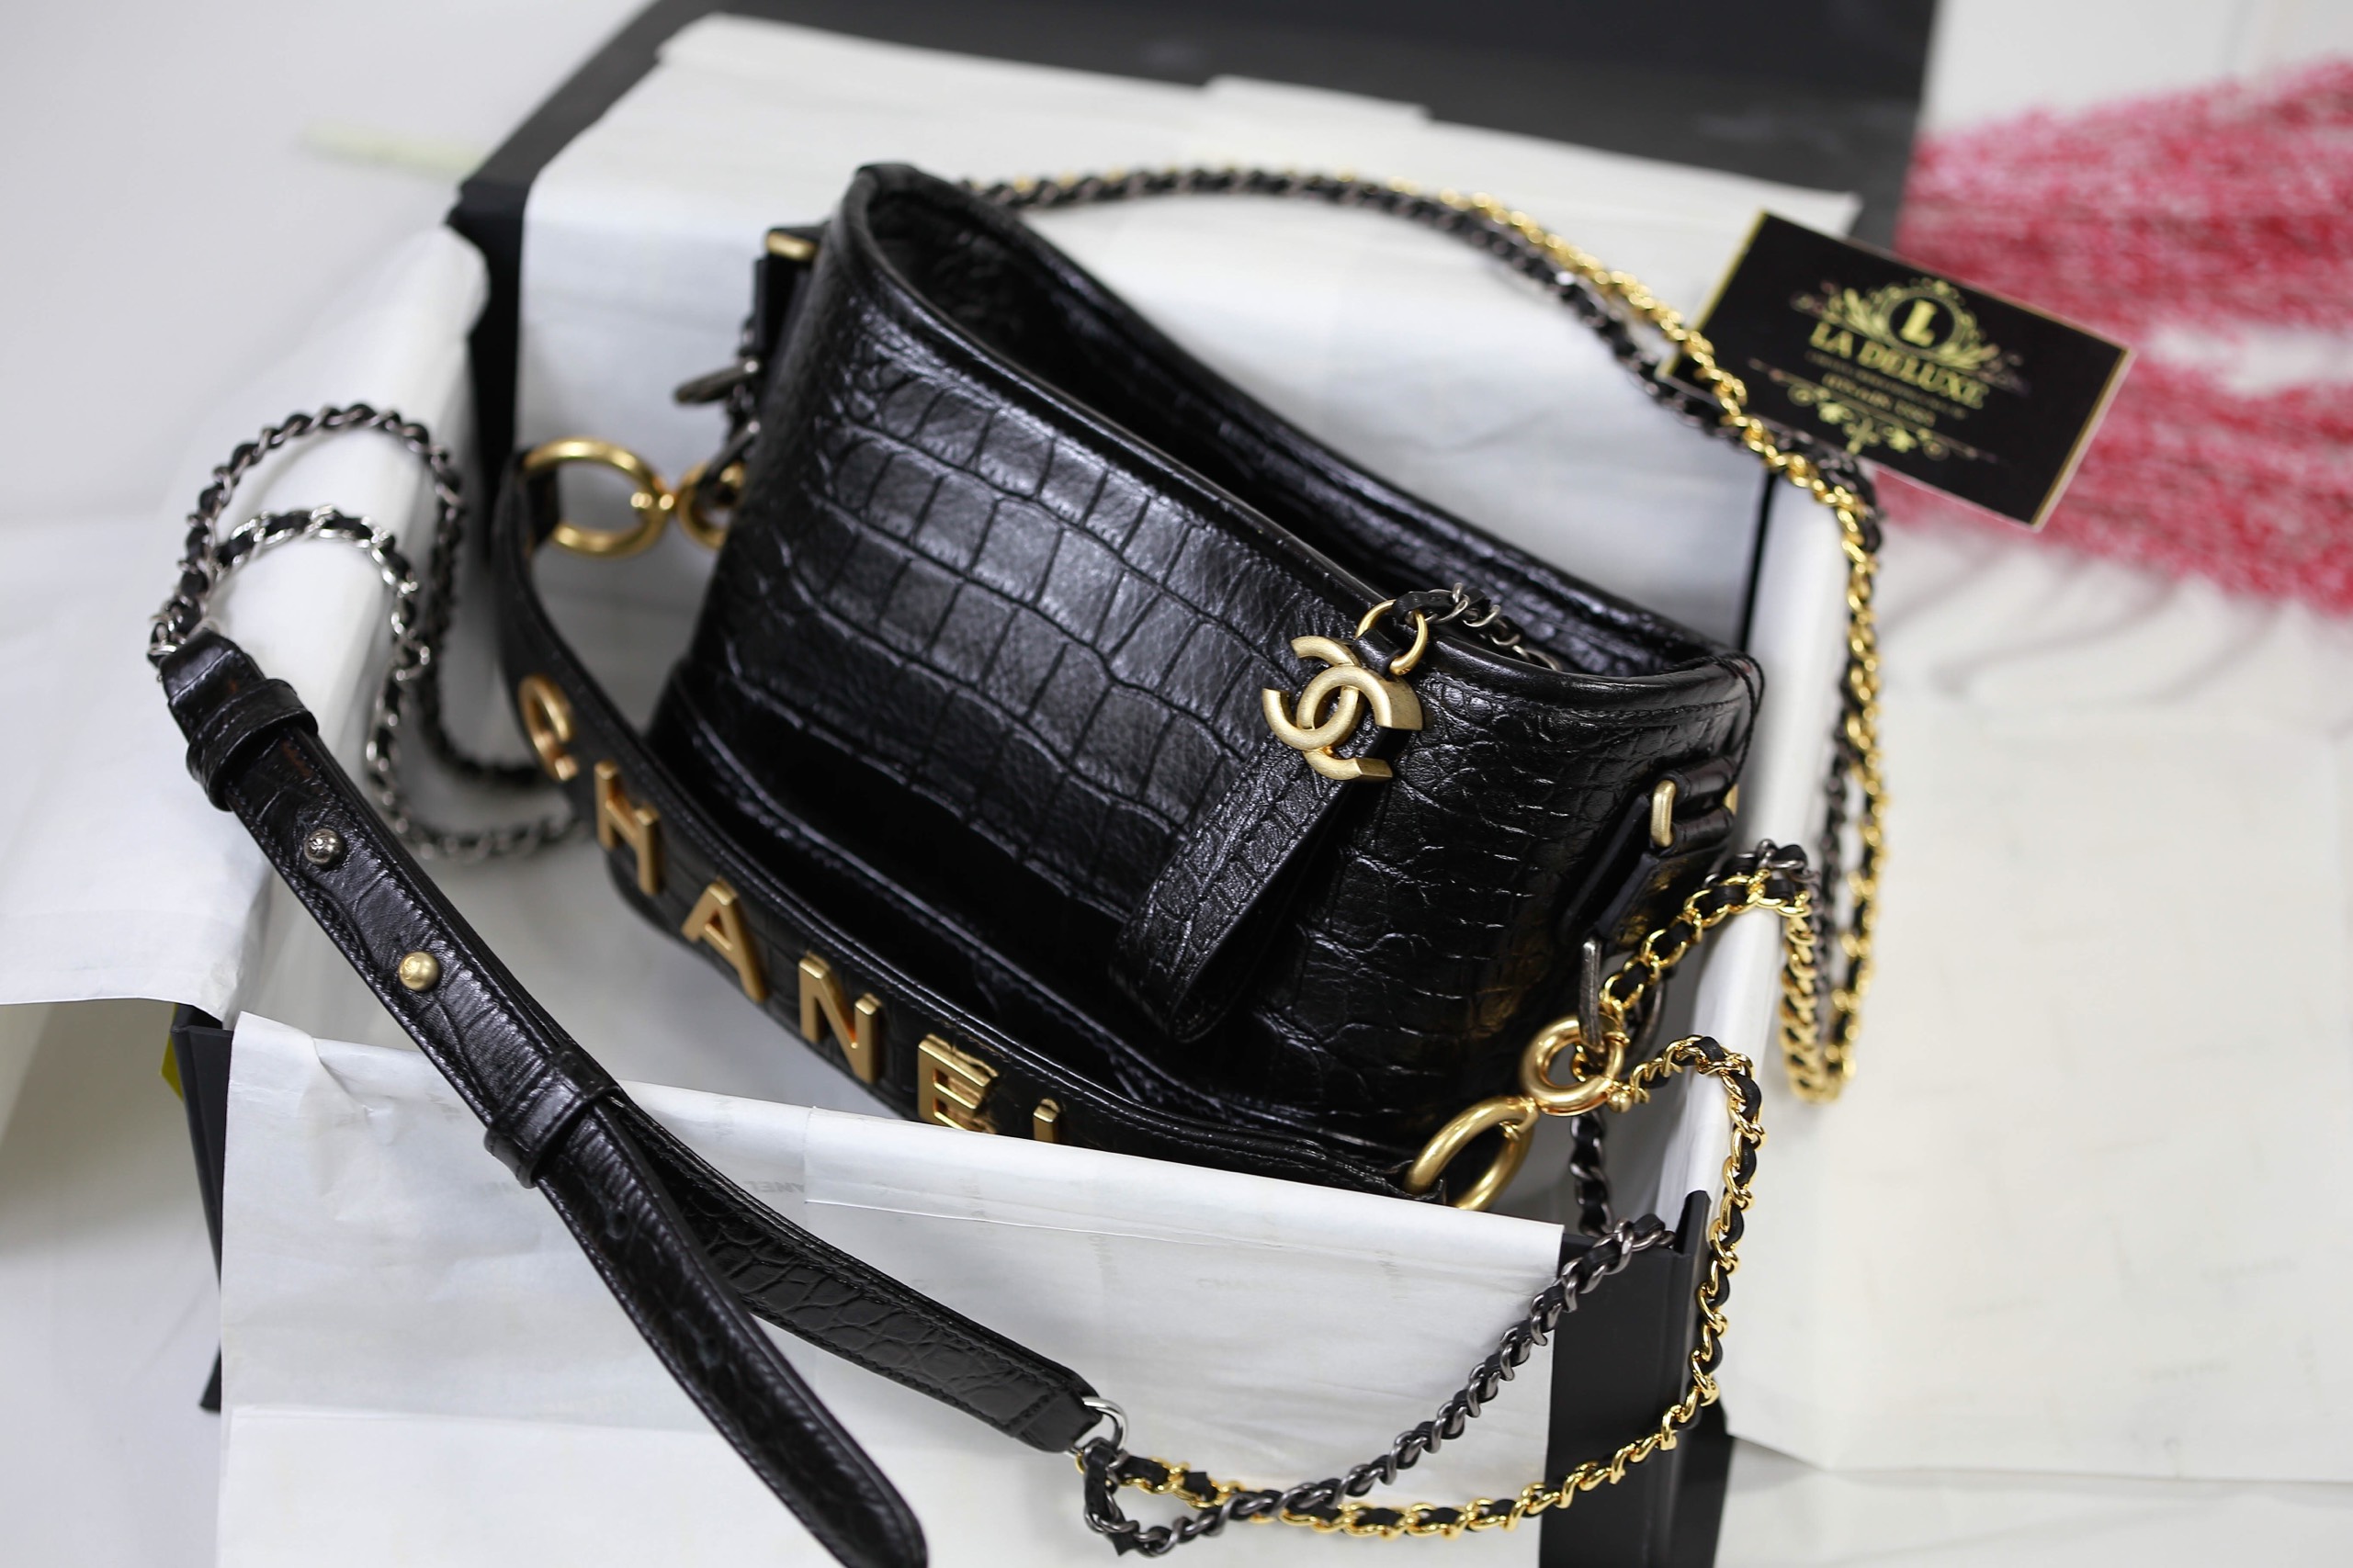 CHANEL GABRIELLE HOBO BAG IN BLACK QUILTED AGED LEATHER  Still in fashion